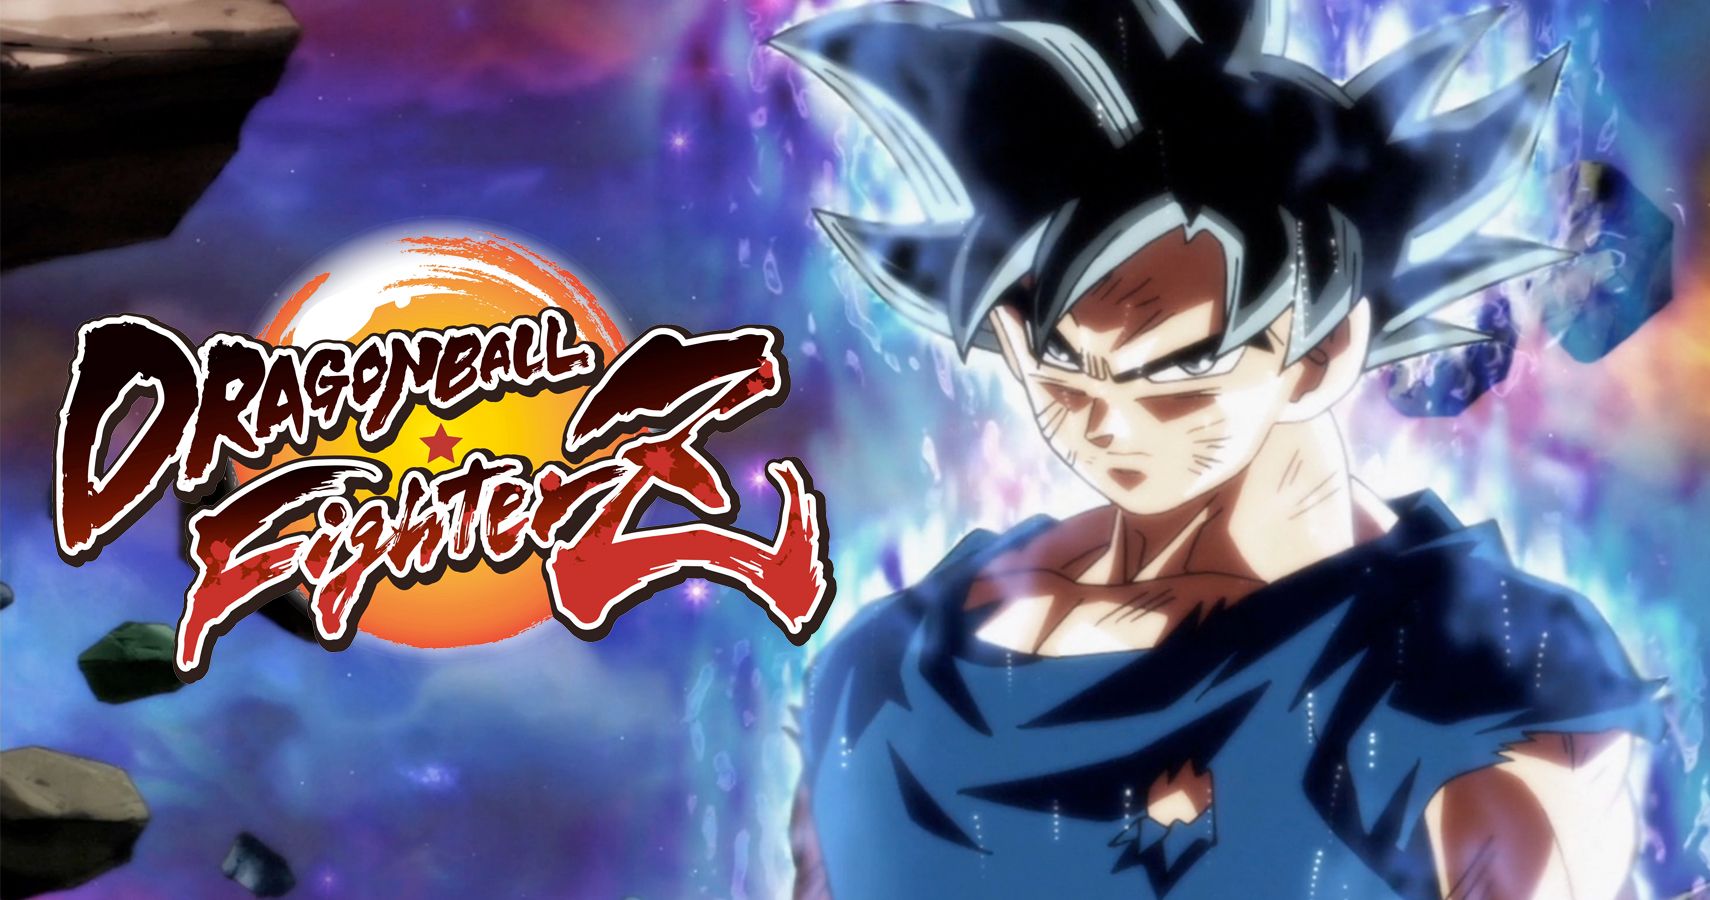 Ultra Instinct Goku is coming to Dragon Ball FighterZ